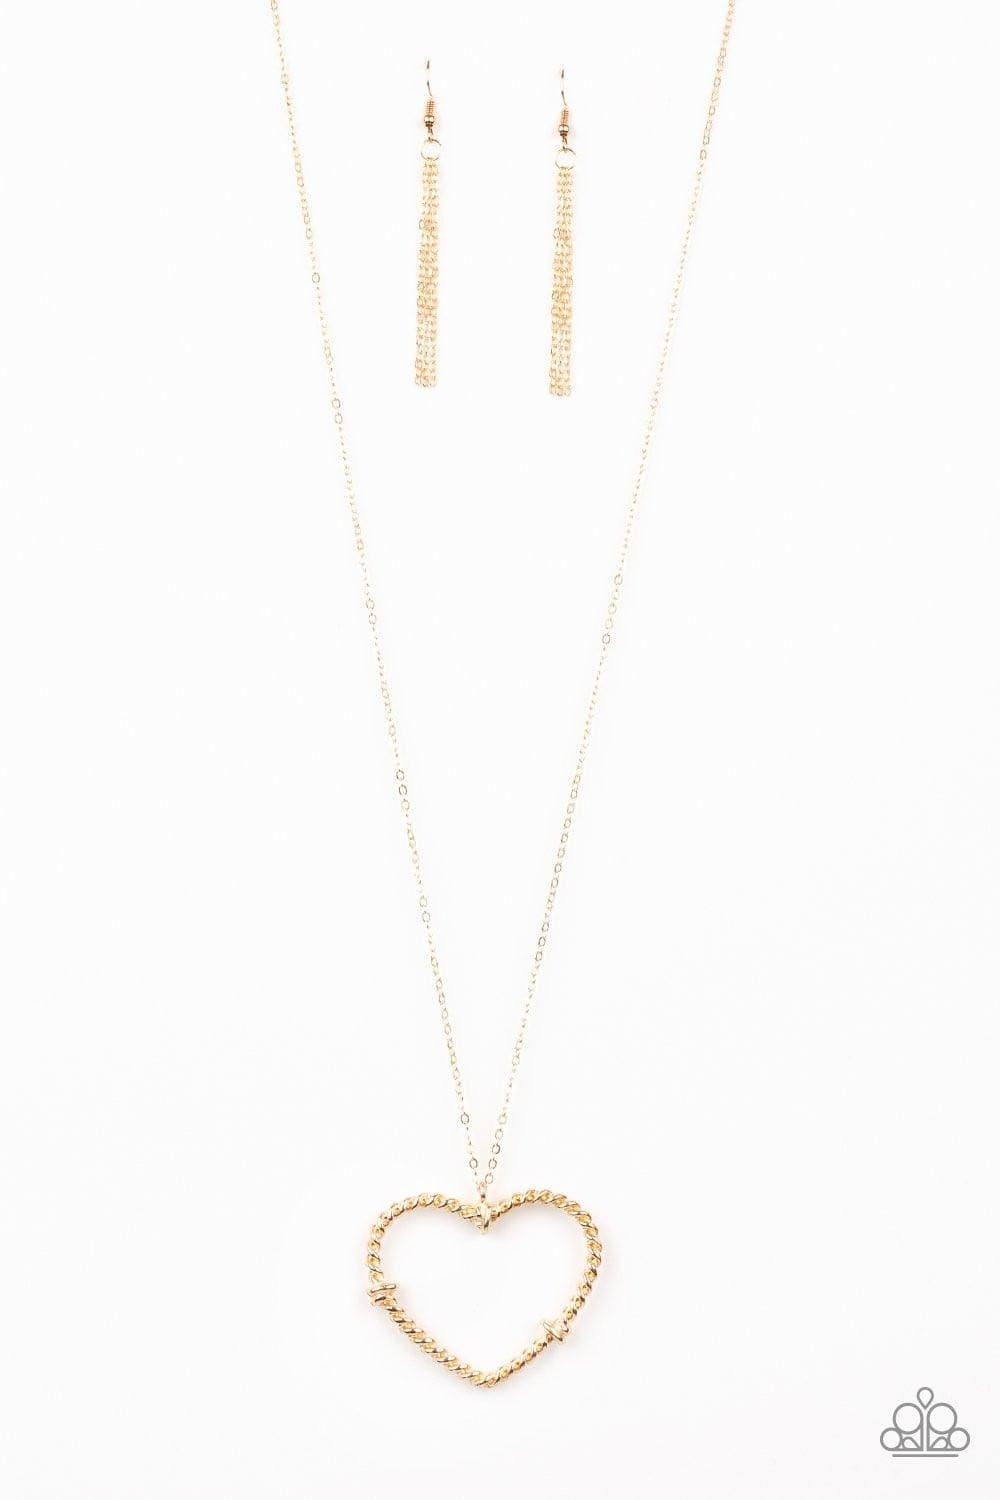 Paparazzi Accessories - Straight From The Heart - Gold Necklace - Bling by JessieK